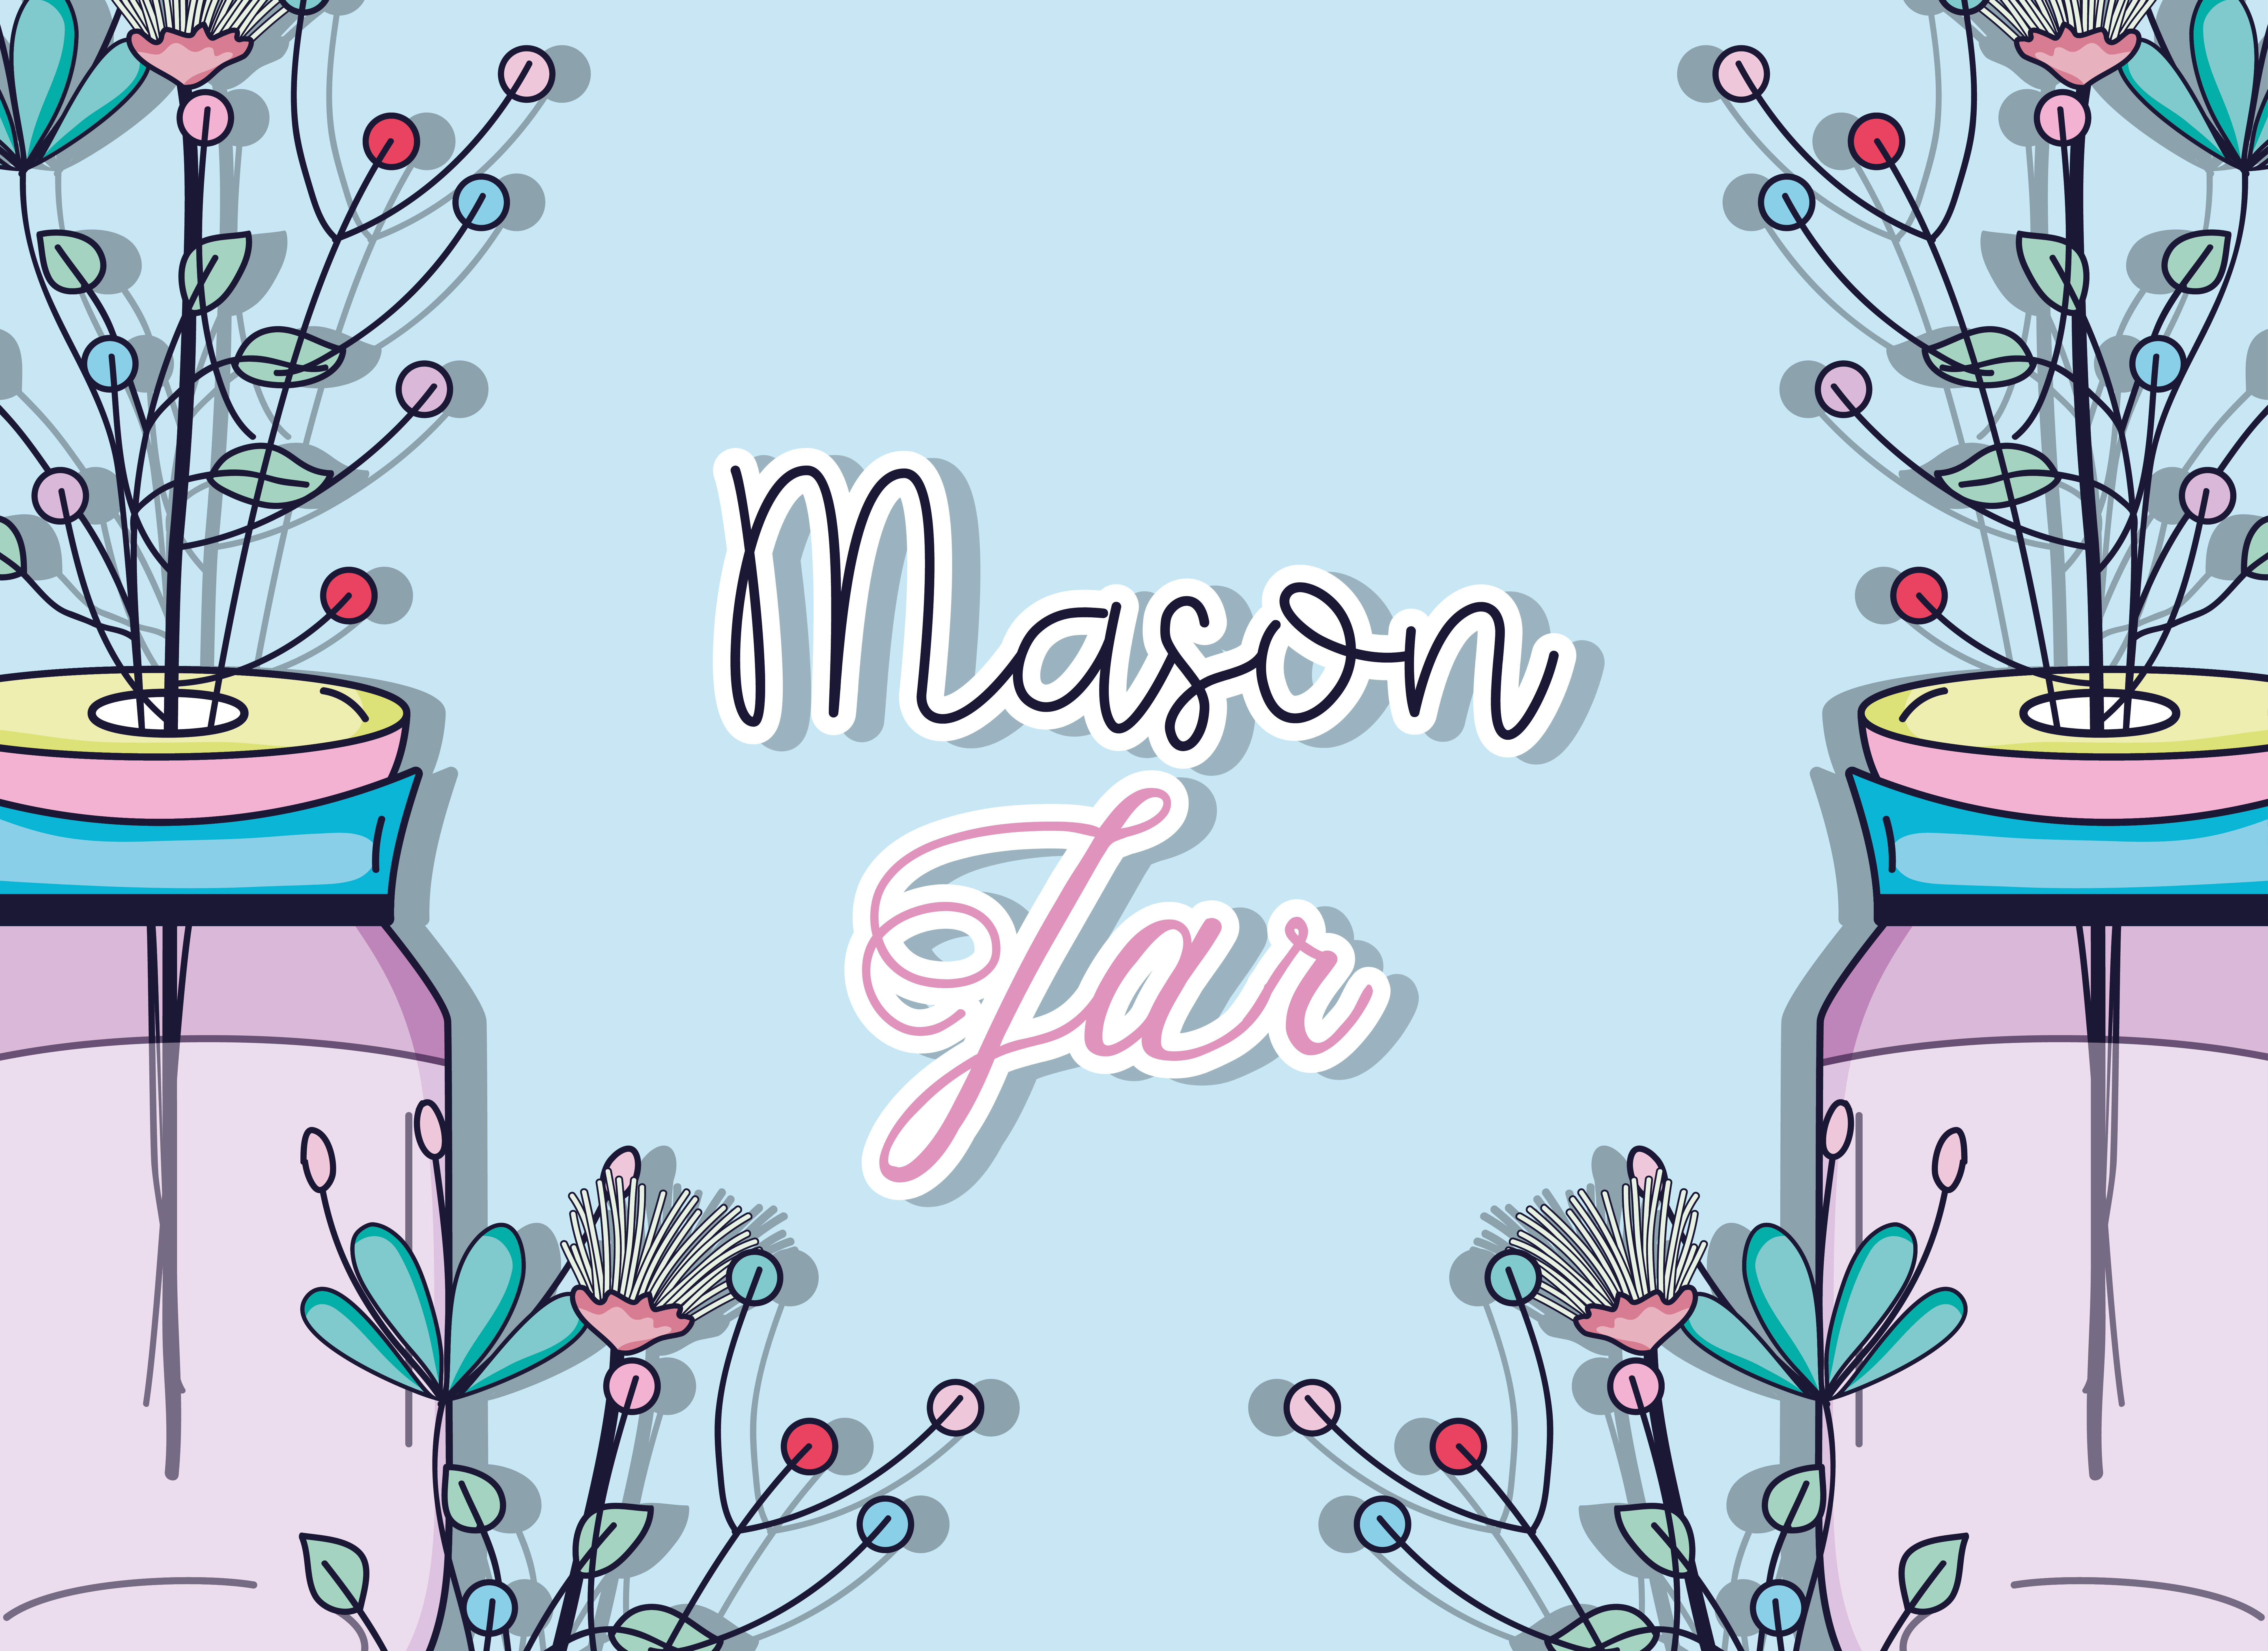 Download Mason jar with flowers 643875 - Download Free Vectors ...